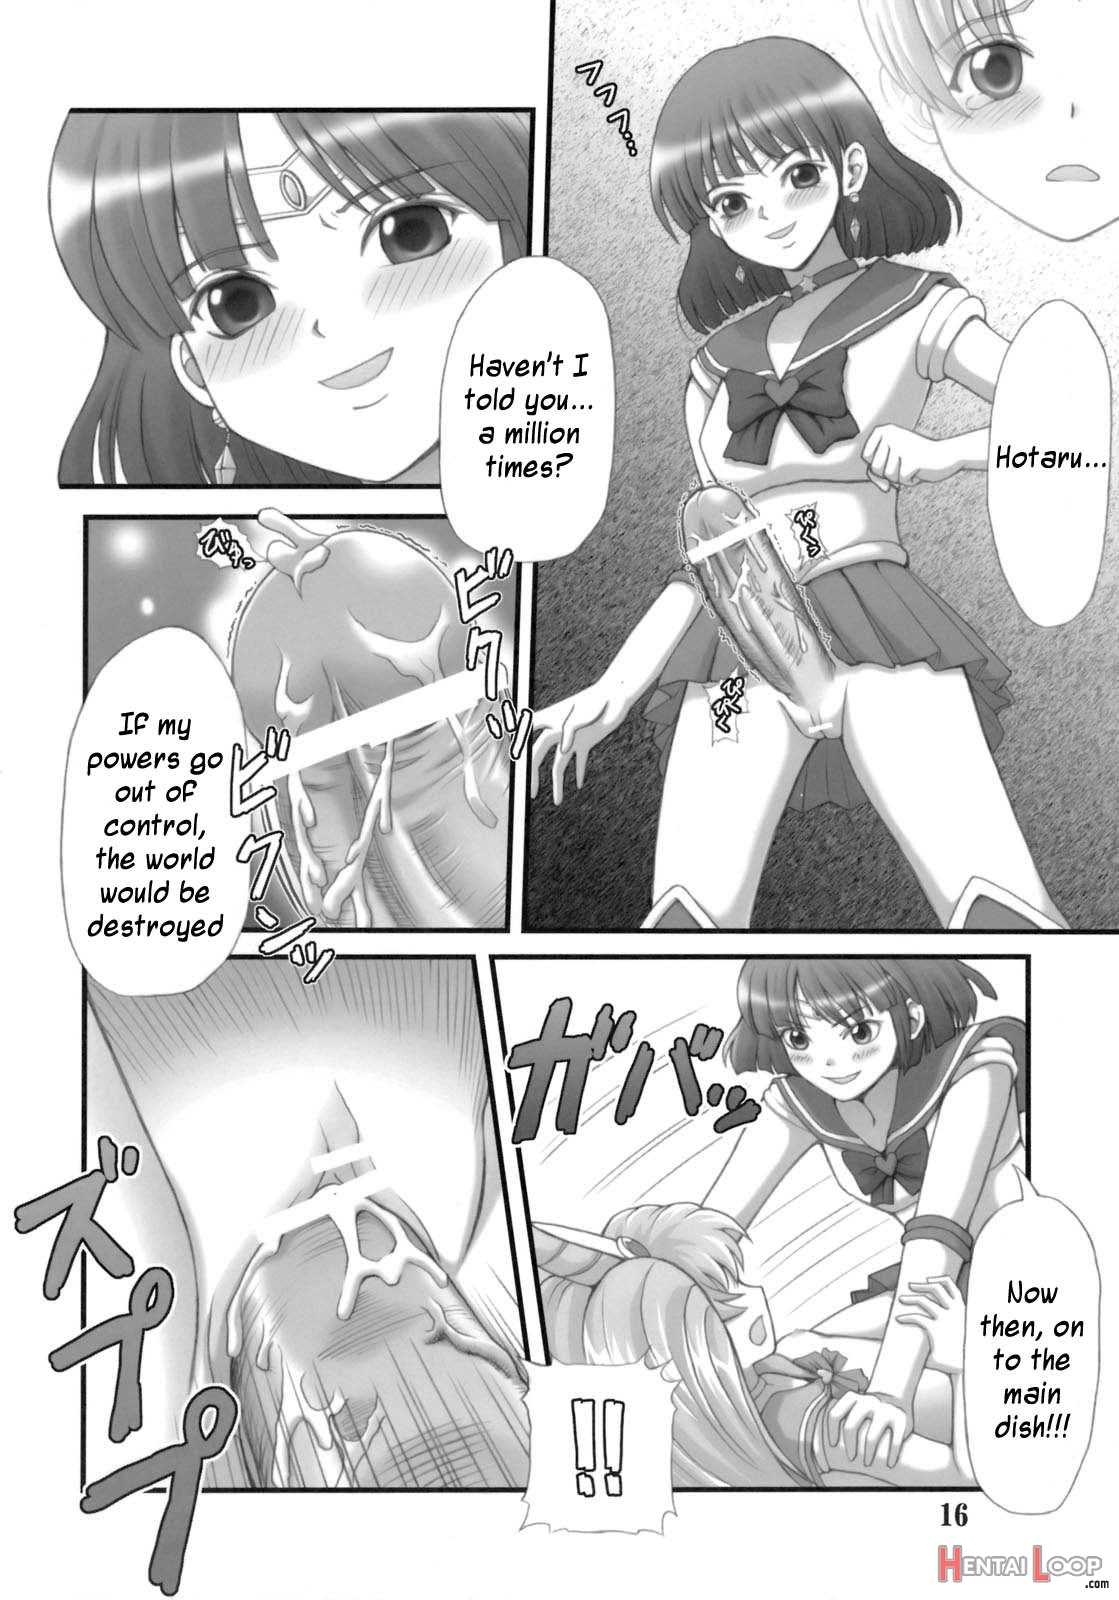 Milky Moon 2 - Completed Edition page 15